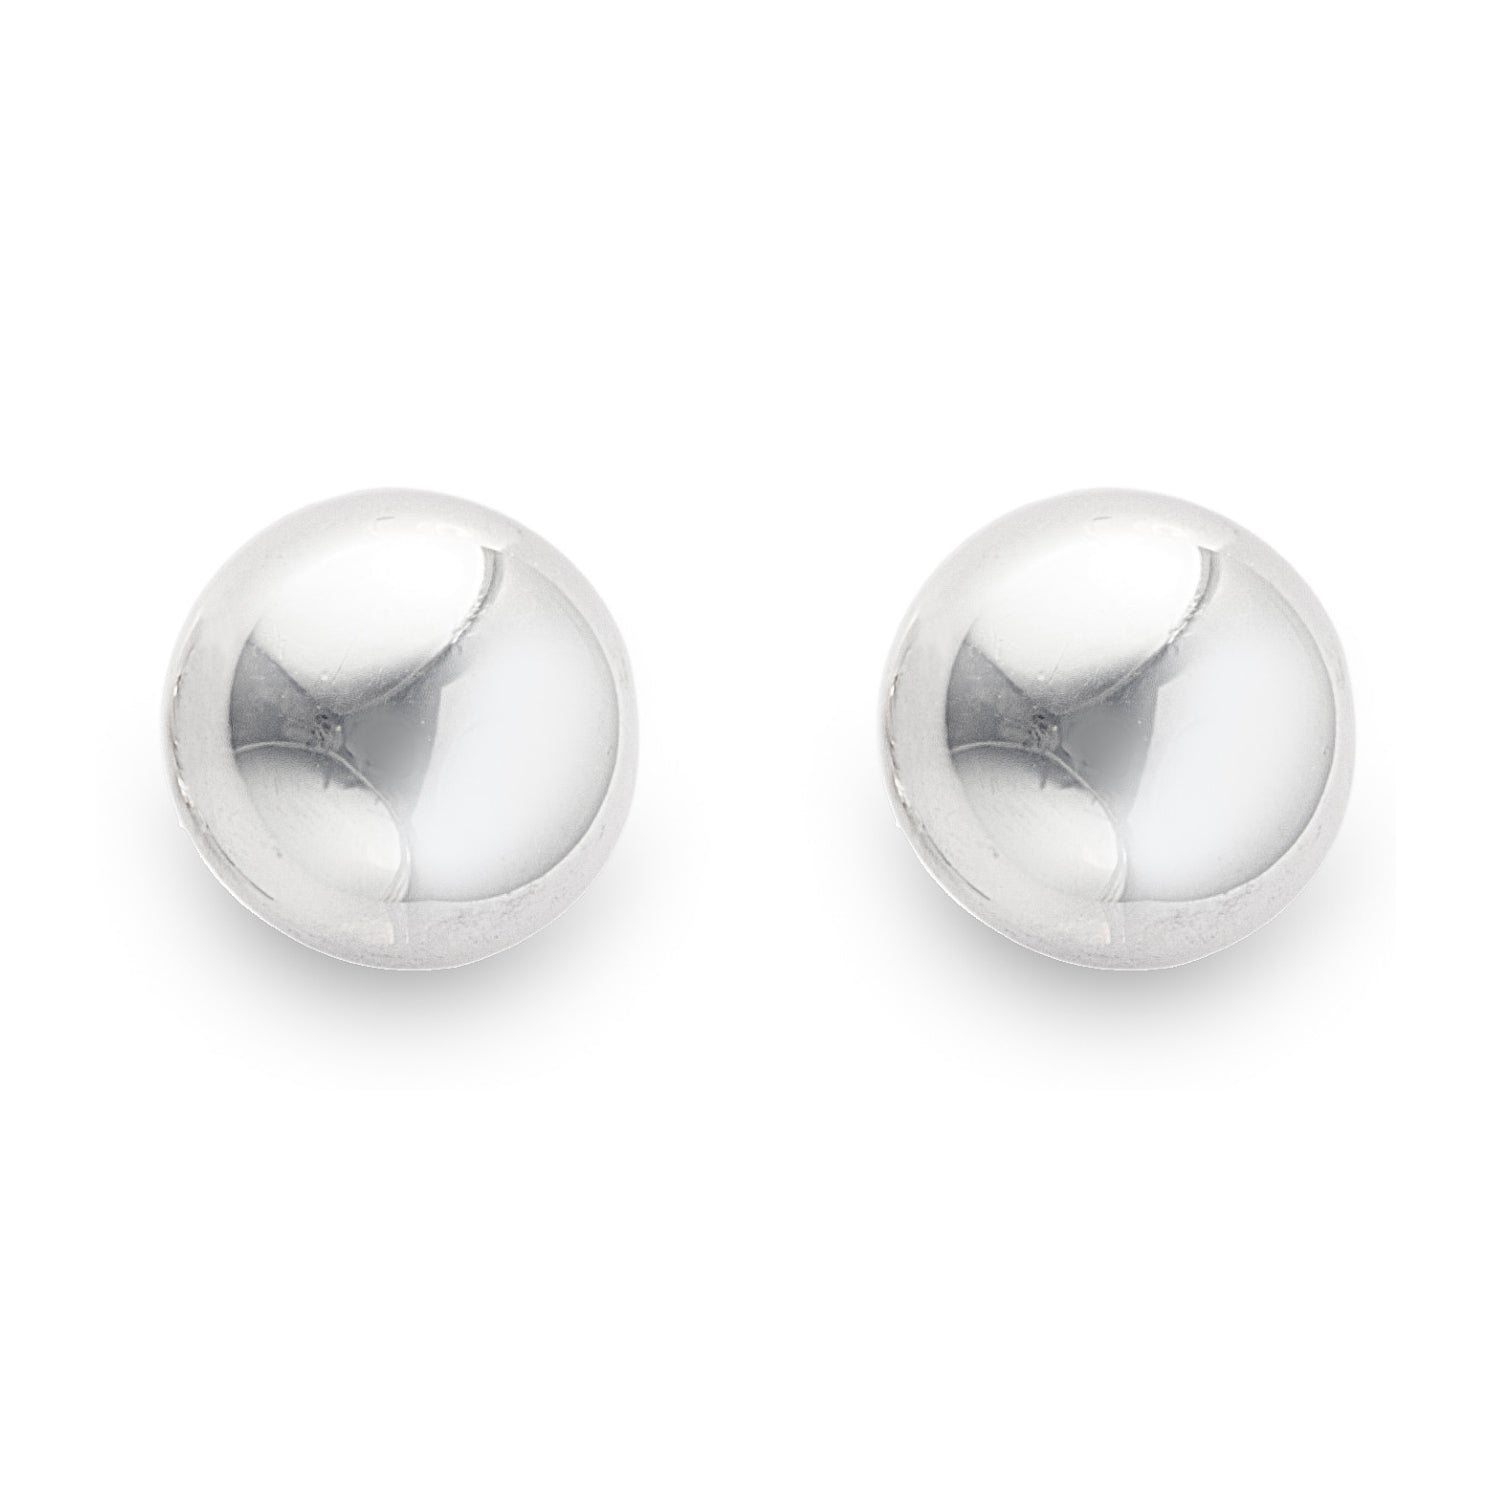 Grand Villa Ball Stud Earrings, extra large balls in 925 sterling silver. Worldwide shipping. Jewellery by Bellagio & Co.